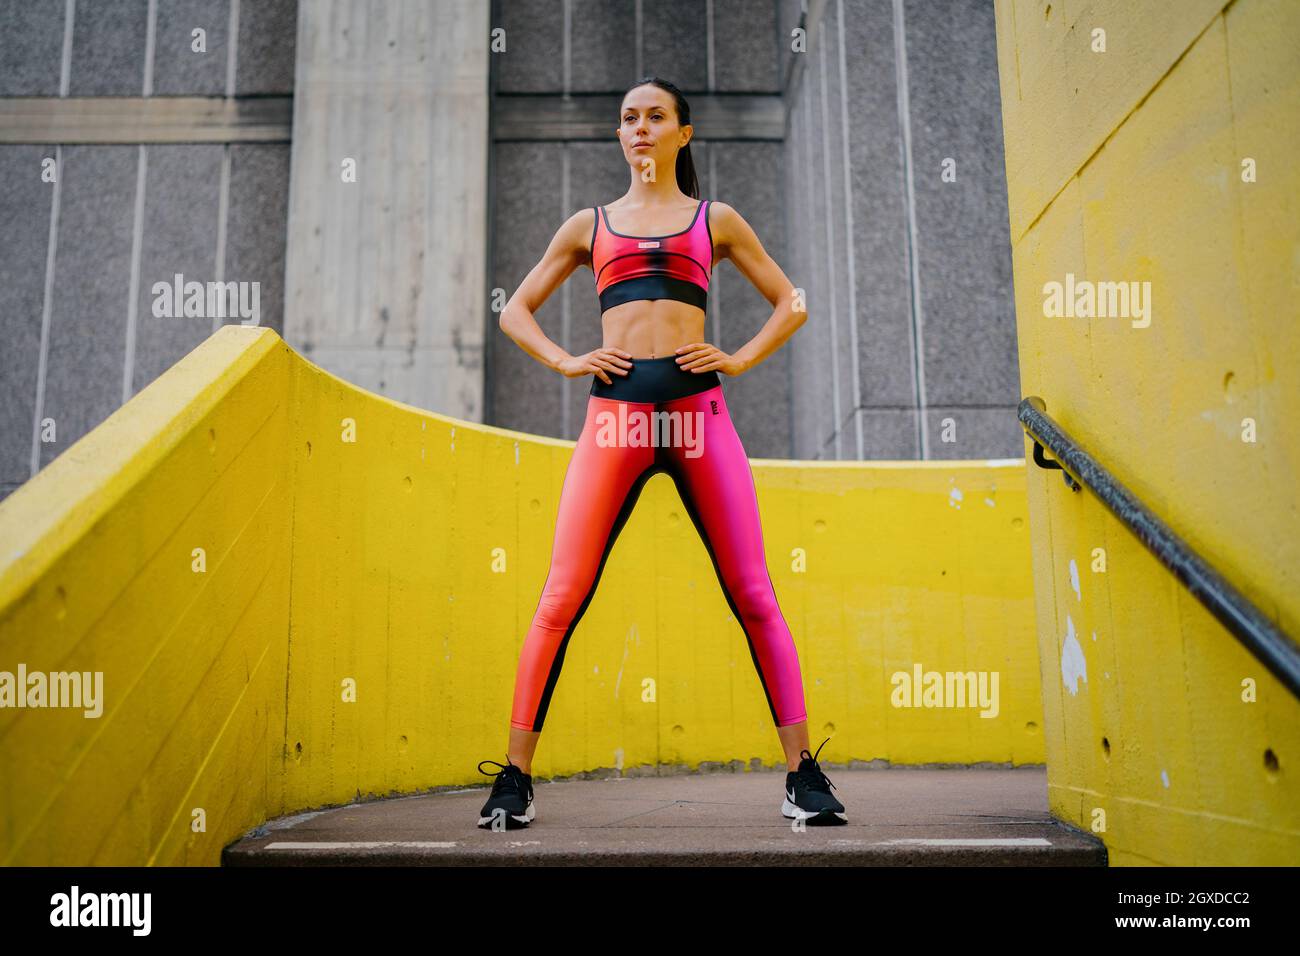 An athletic woman in a pink sports outfit poses in an urban environment Stock Photo